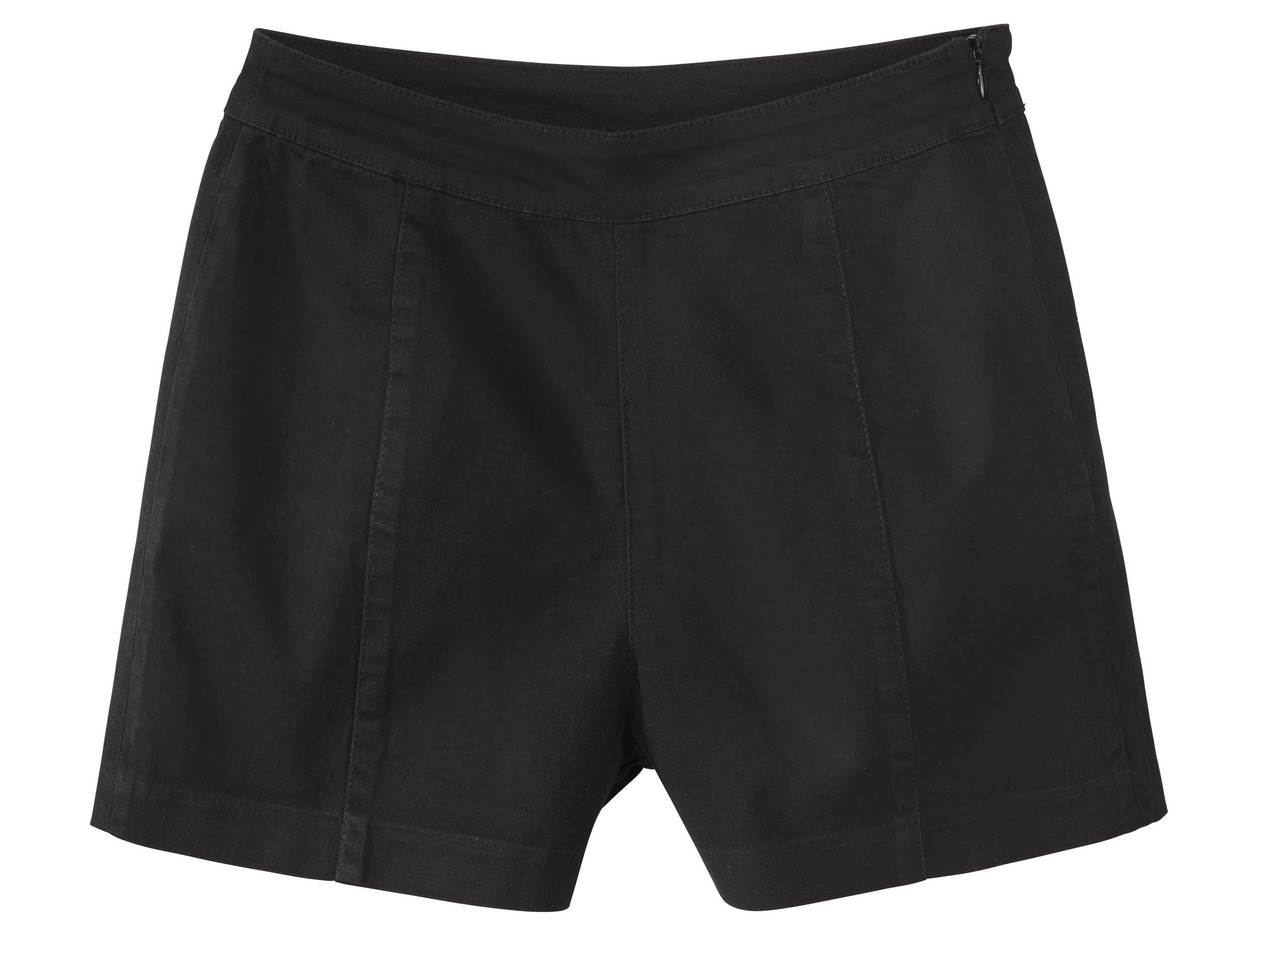 Ladies' High-Waisted Shorts